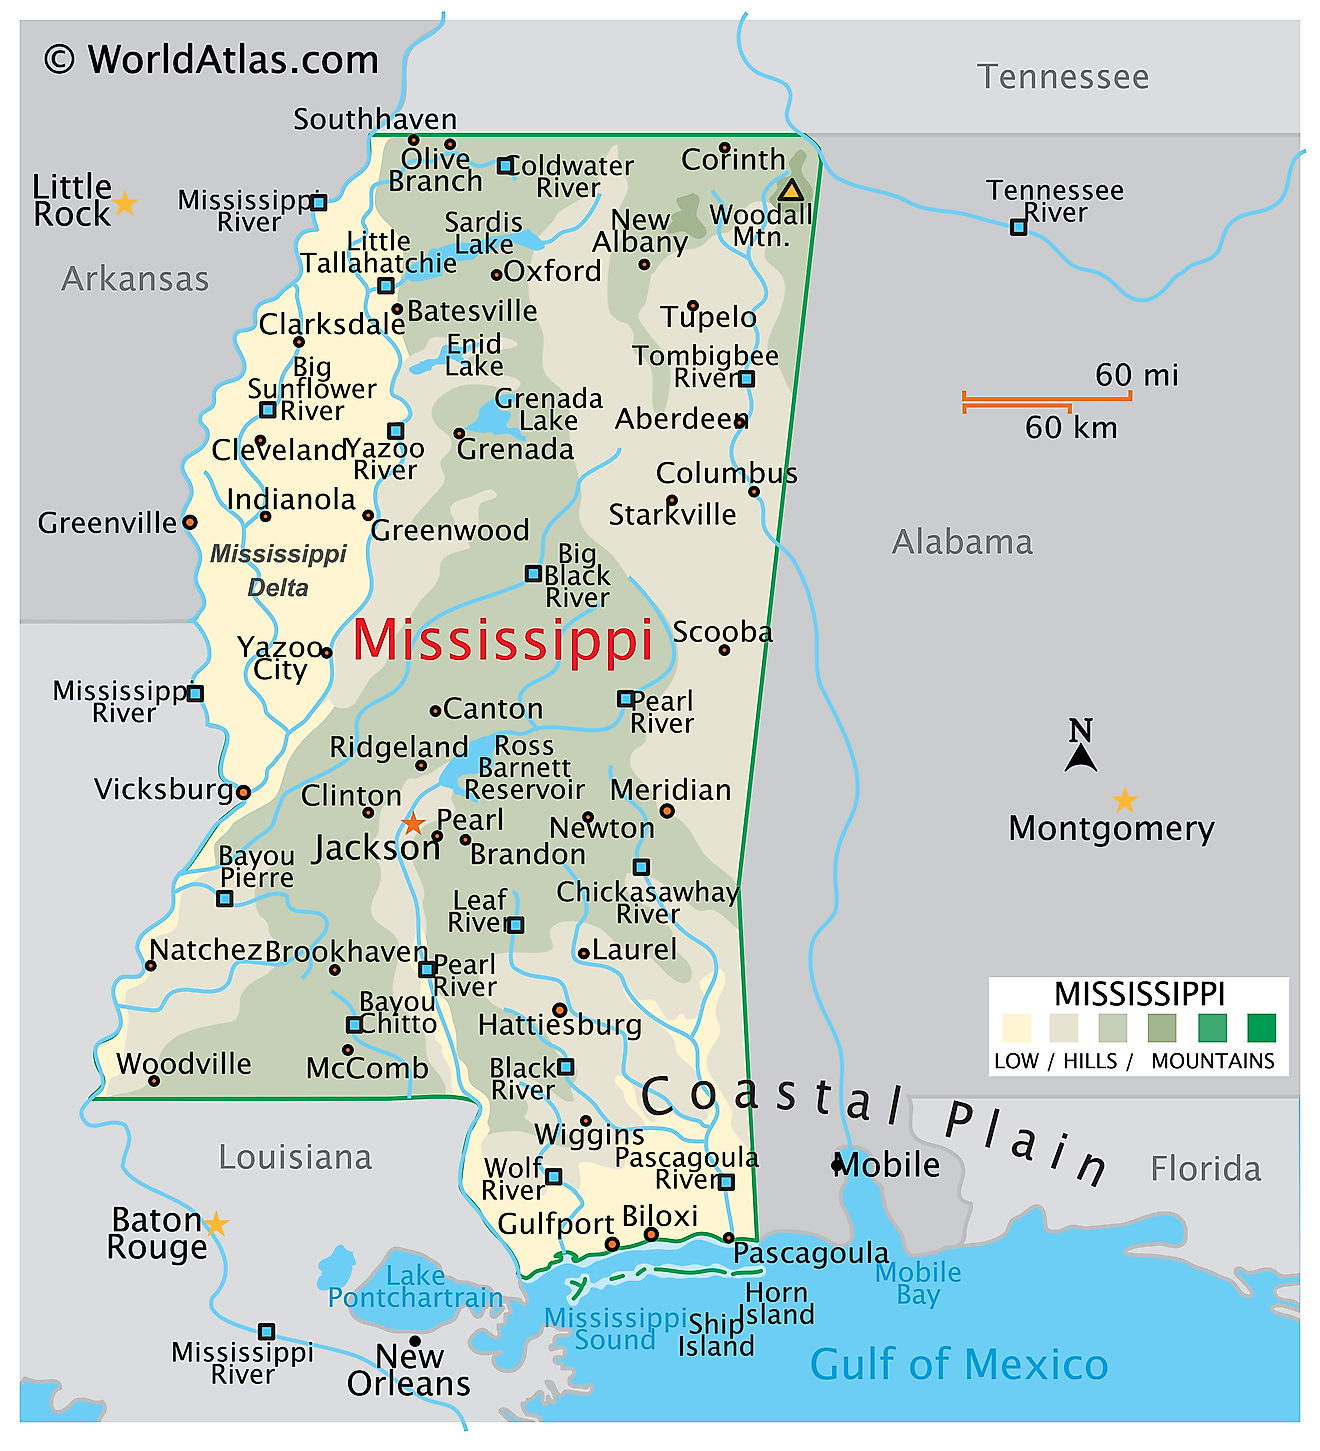 Physical Map of Mississippi. It shows the physical features of Mississippi including its mountain ranges, major rivers, lakes and the Gulf of Mexico